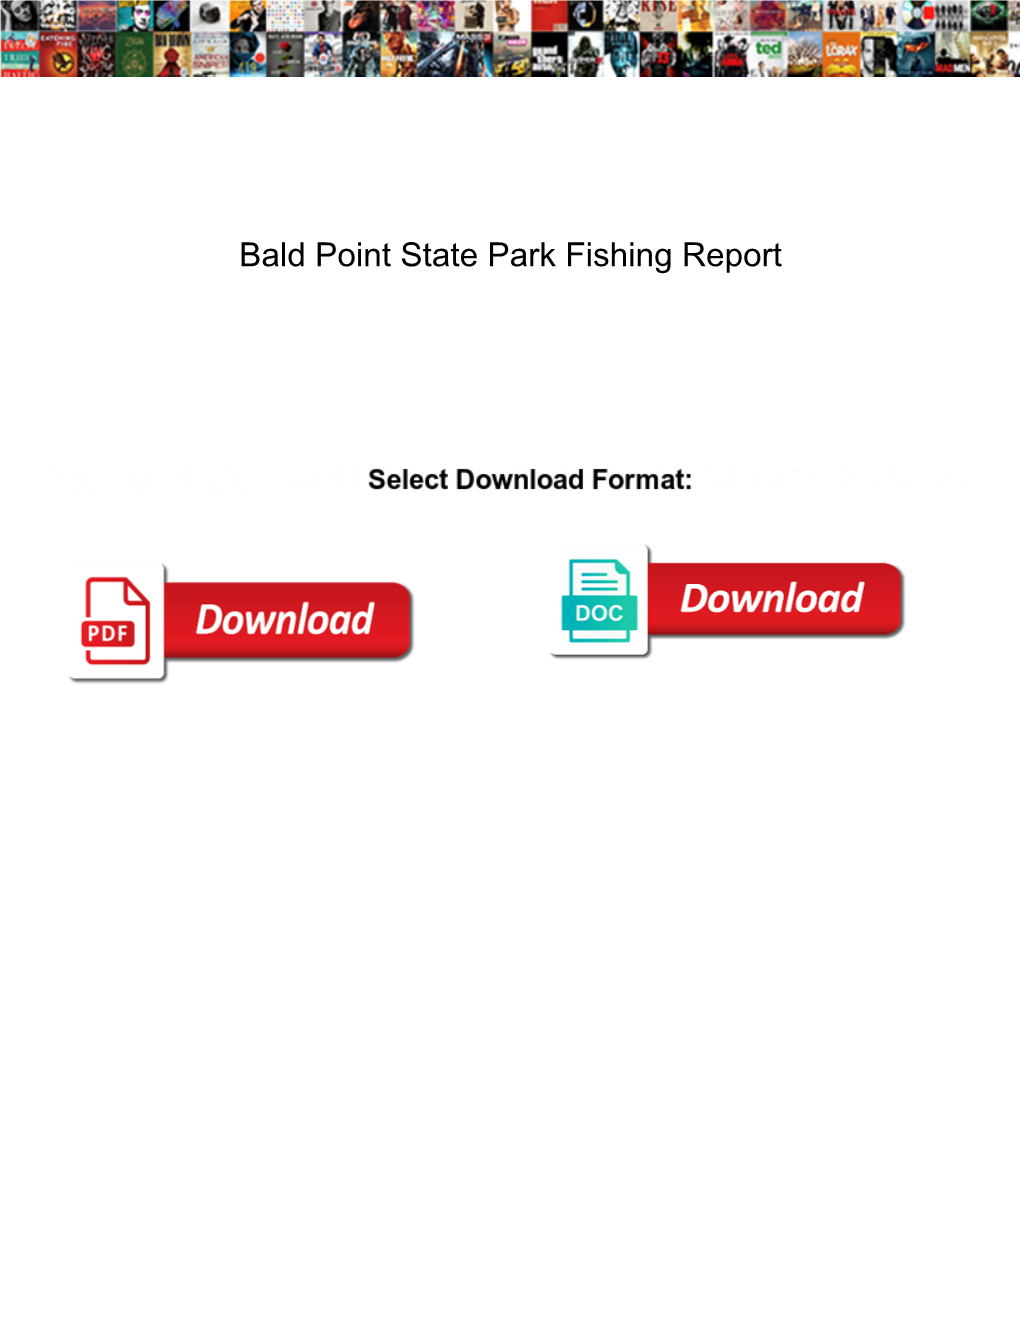 Bald Point State Park Fishing Report